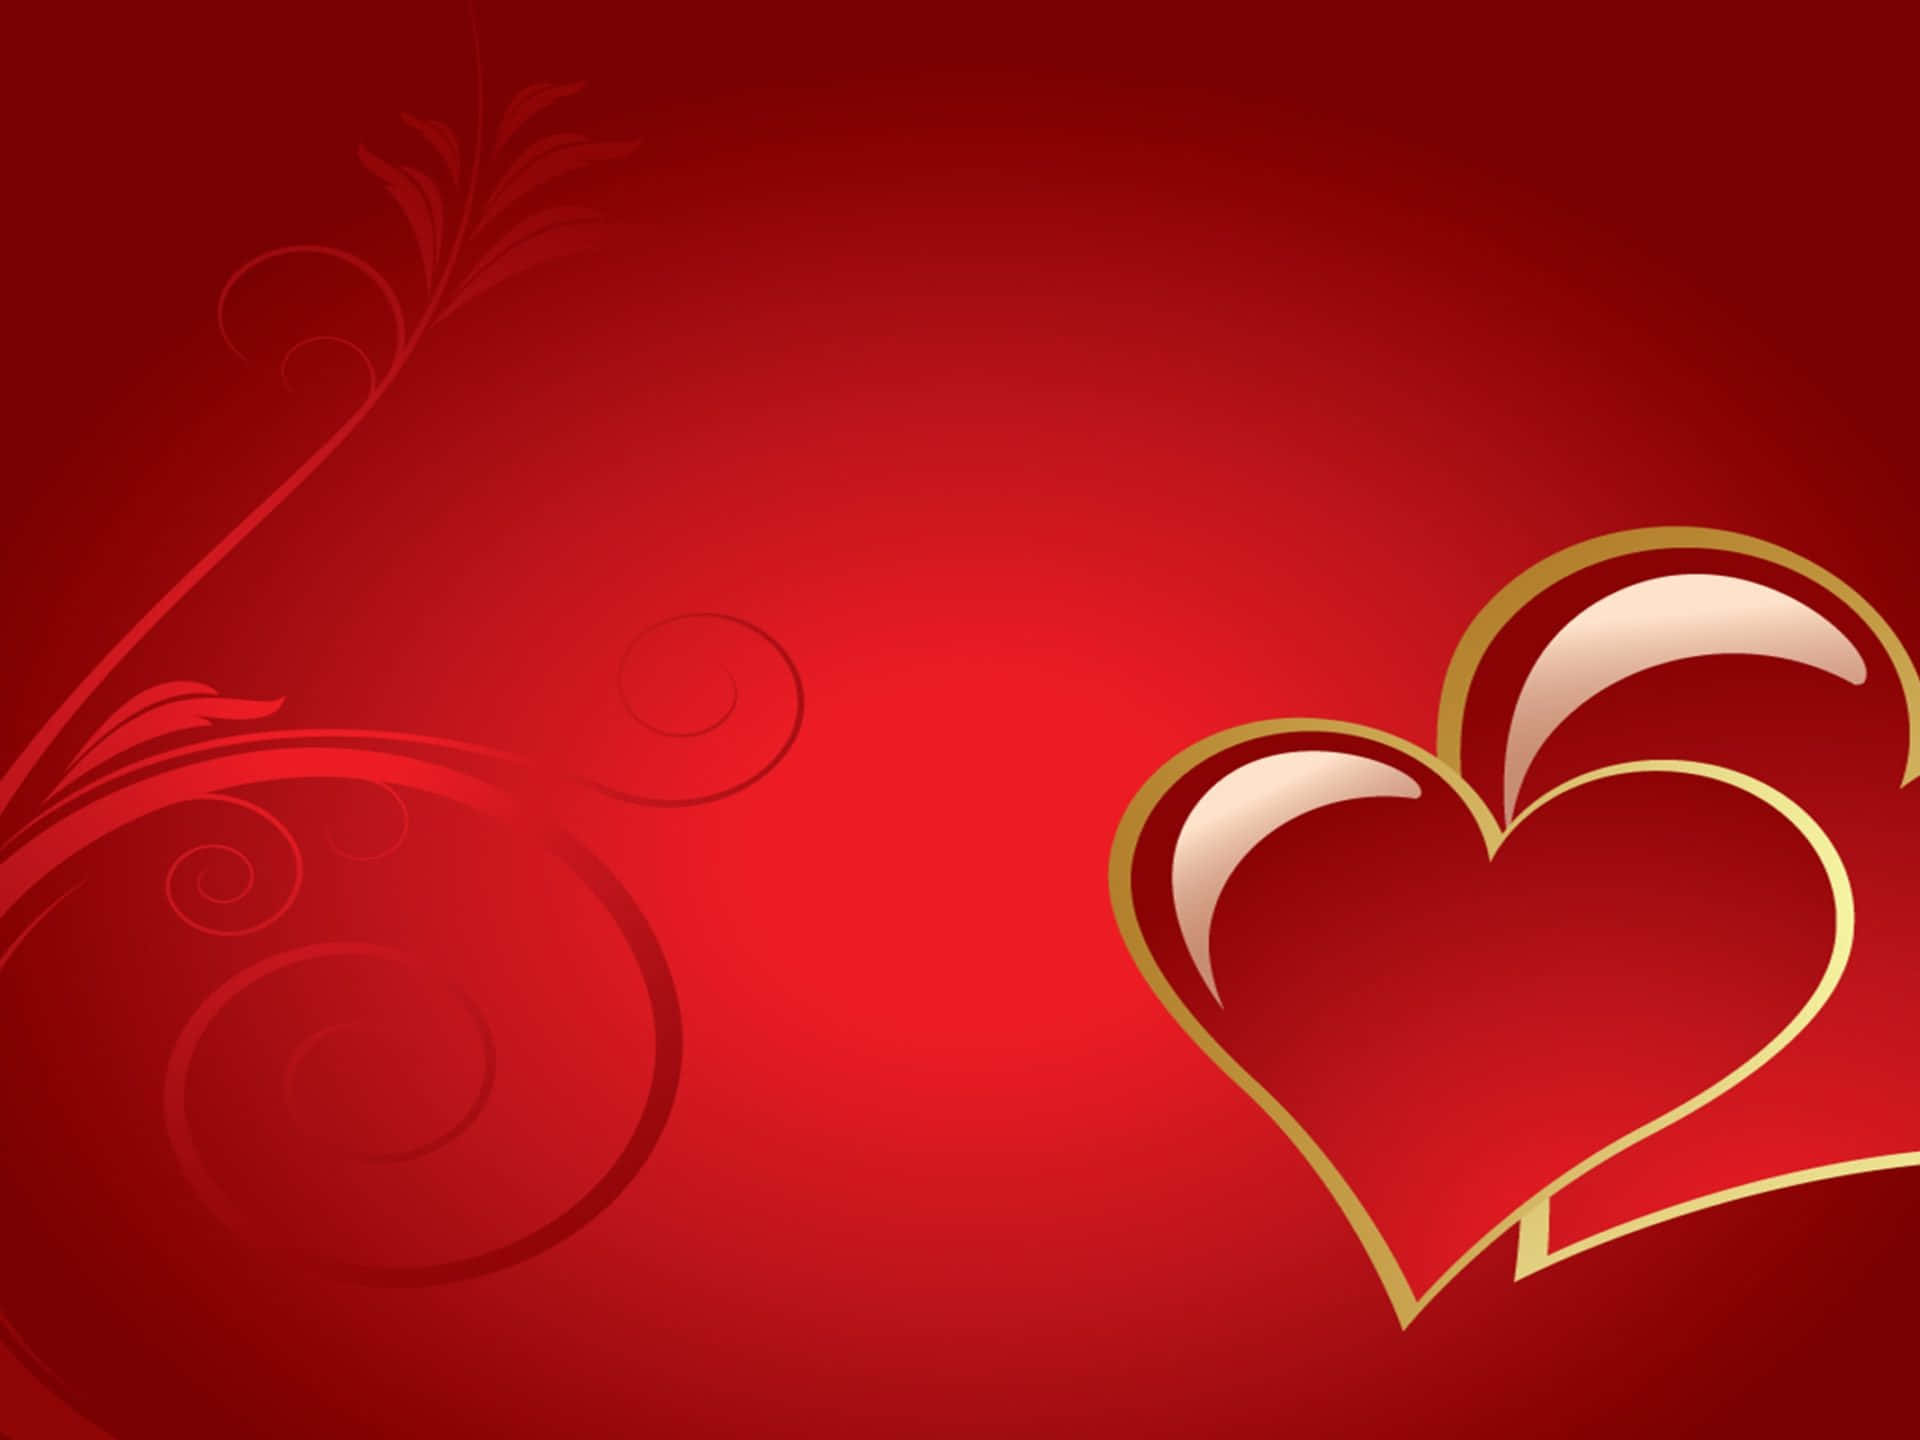 Show your love this Valentines Day with a beautiful and HD background!